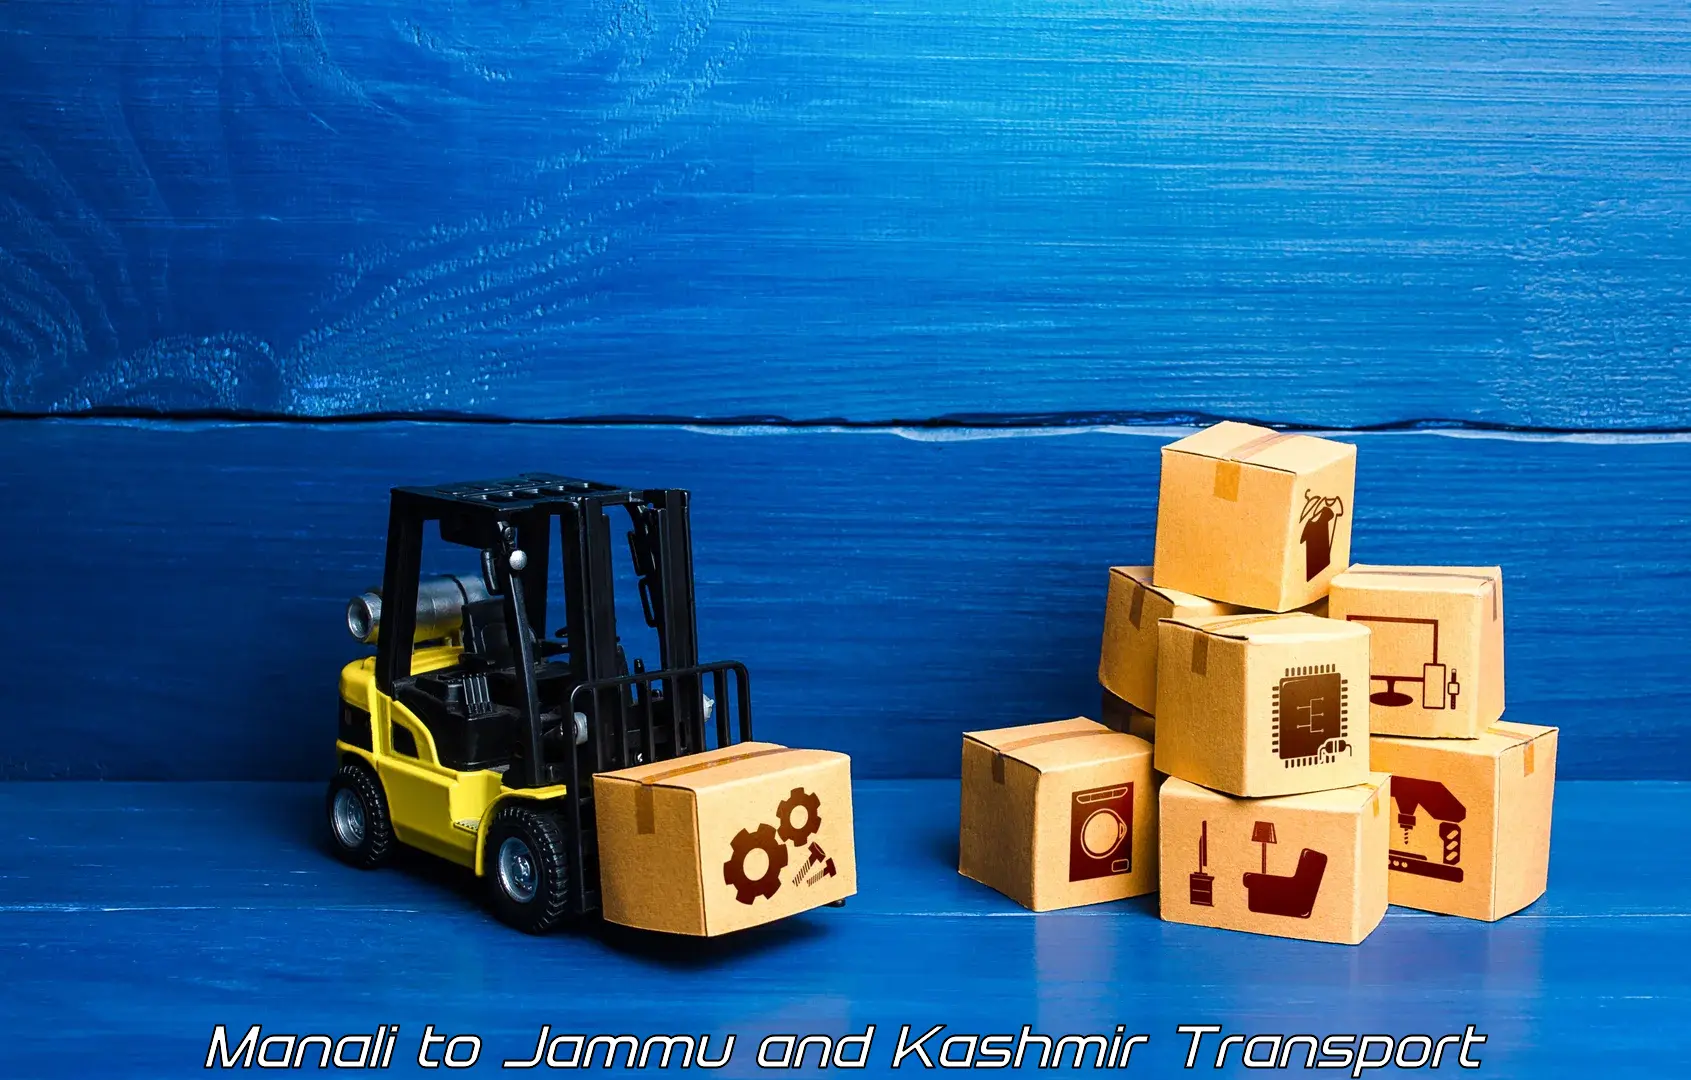 Truck transport companies in India Manali to Poonch